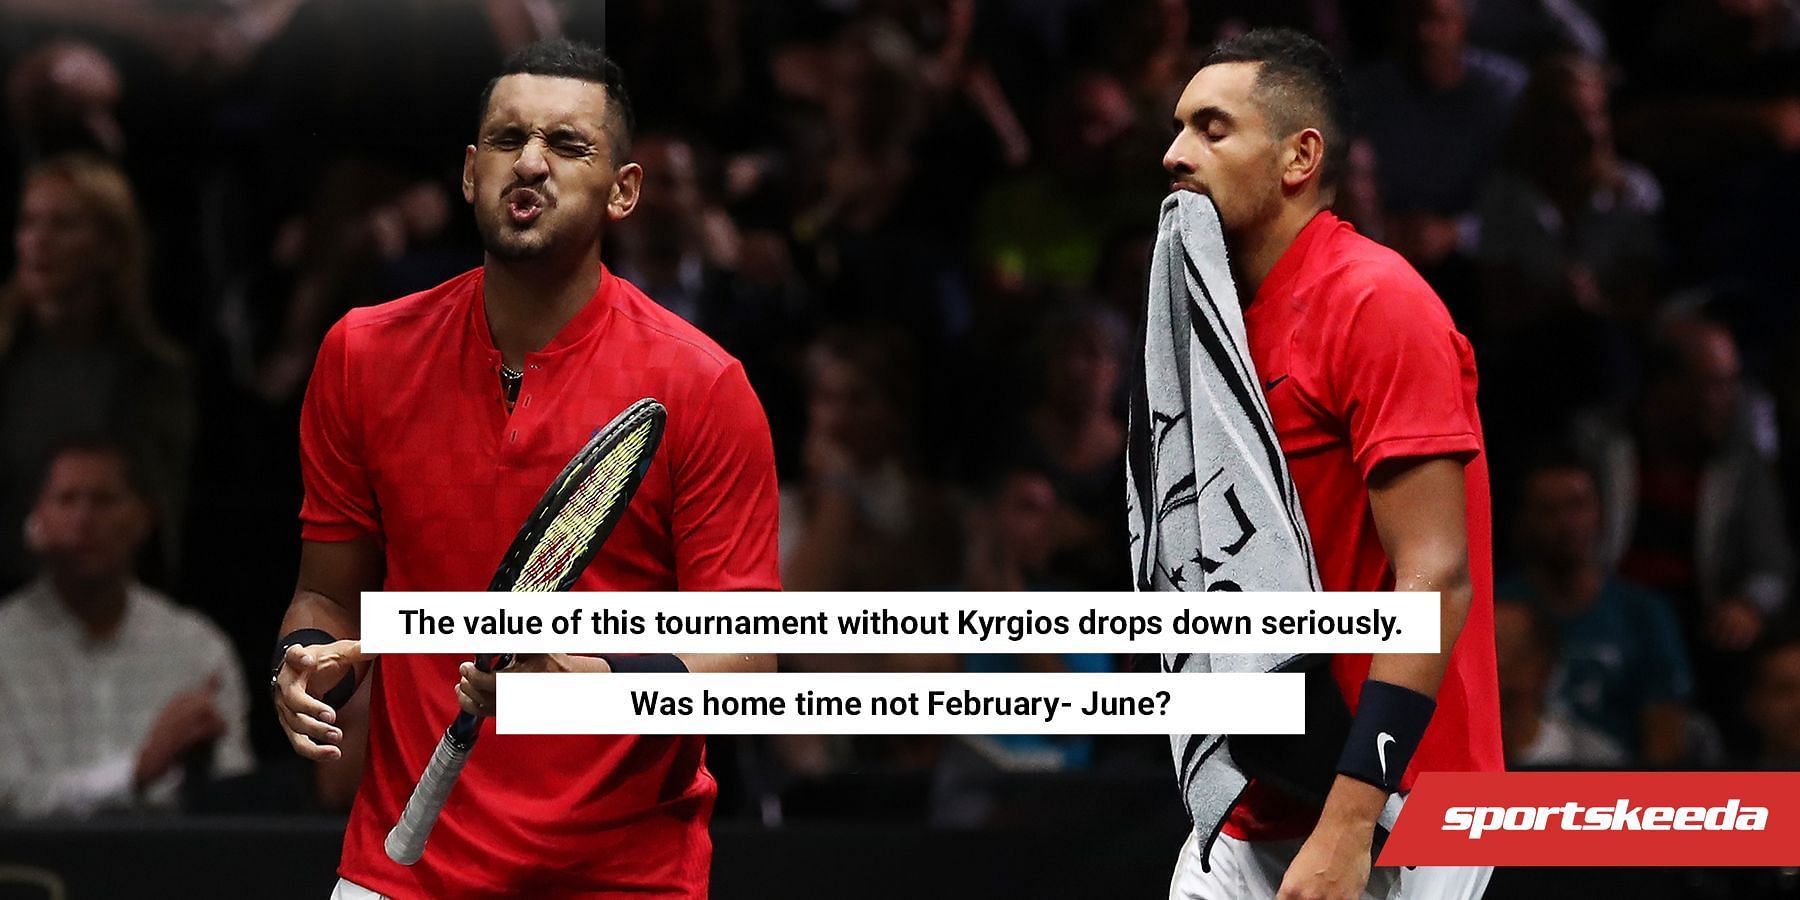 Nick Kyrgios will not play in the Laver Cup this year